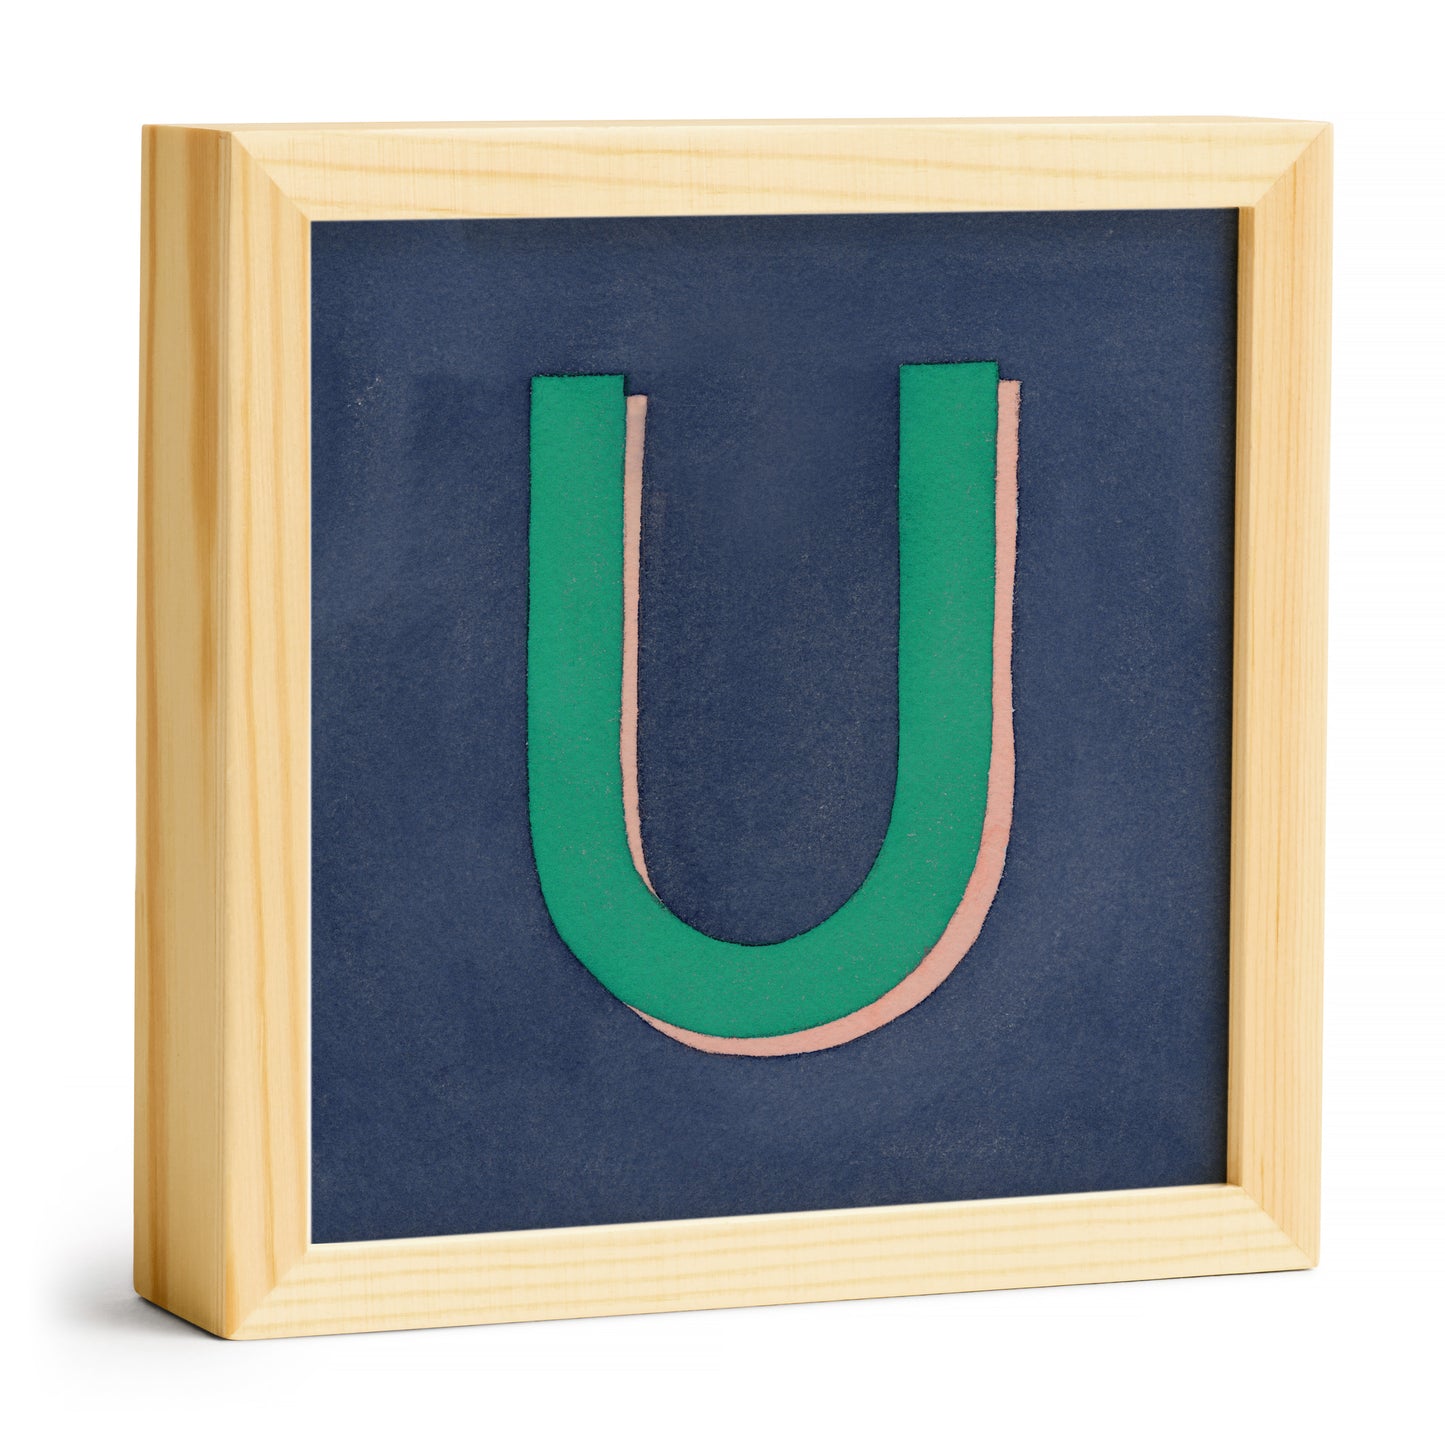 U is for... Little Print